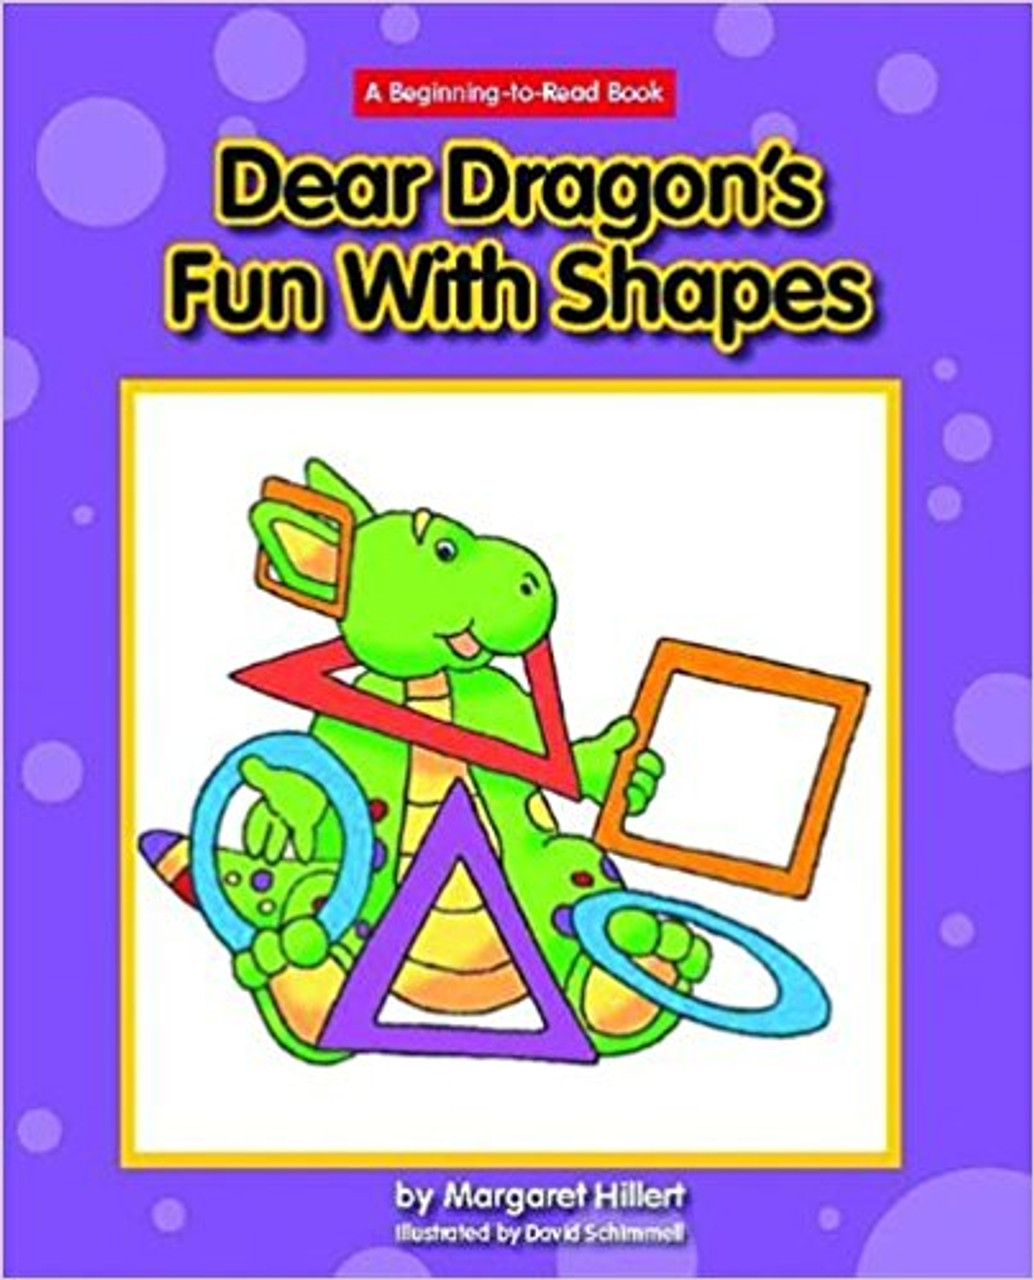 A boy and his pet dragon look at shapes such as squares, circles, and triangles, and then go outside to find shapes in nature and objects.